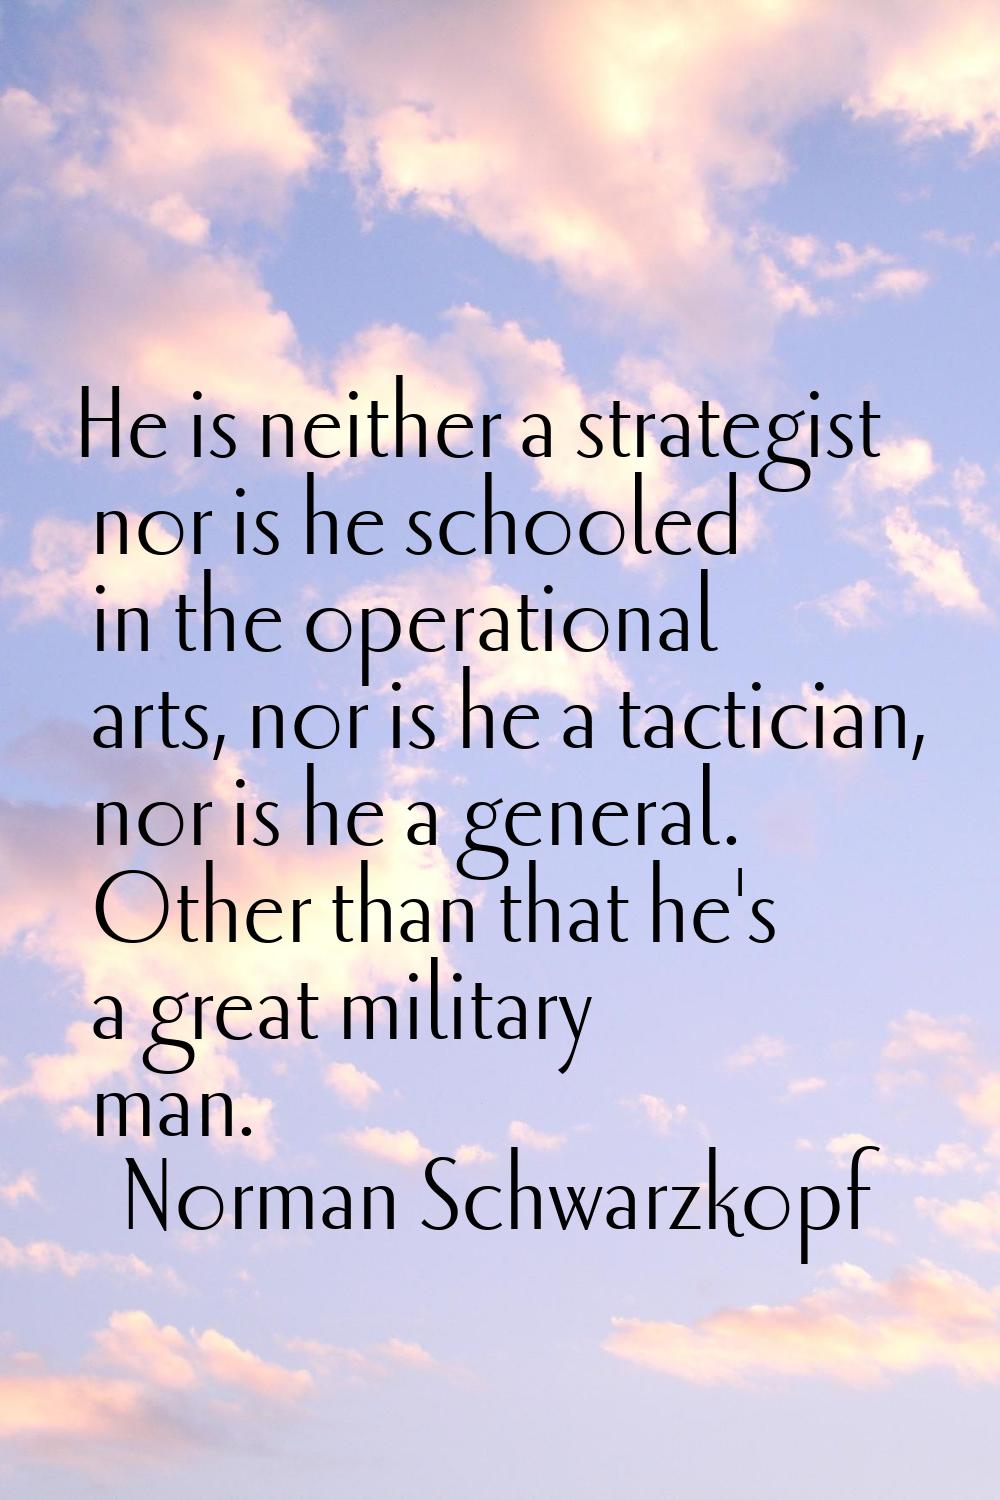 He is neither a strategist nor is he schooled in the operational arts, nor is he a tactician, nor i